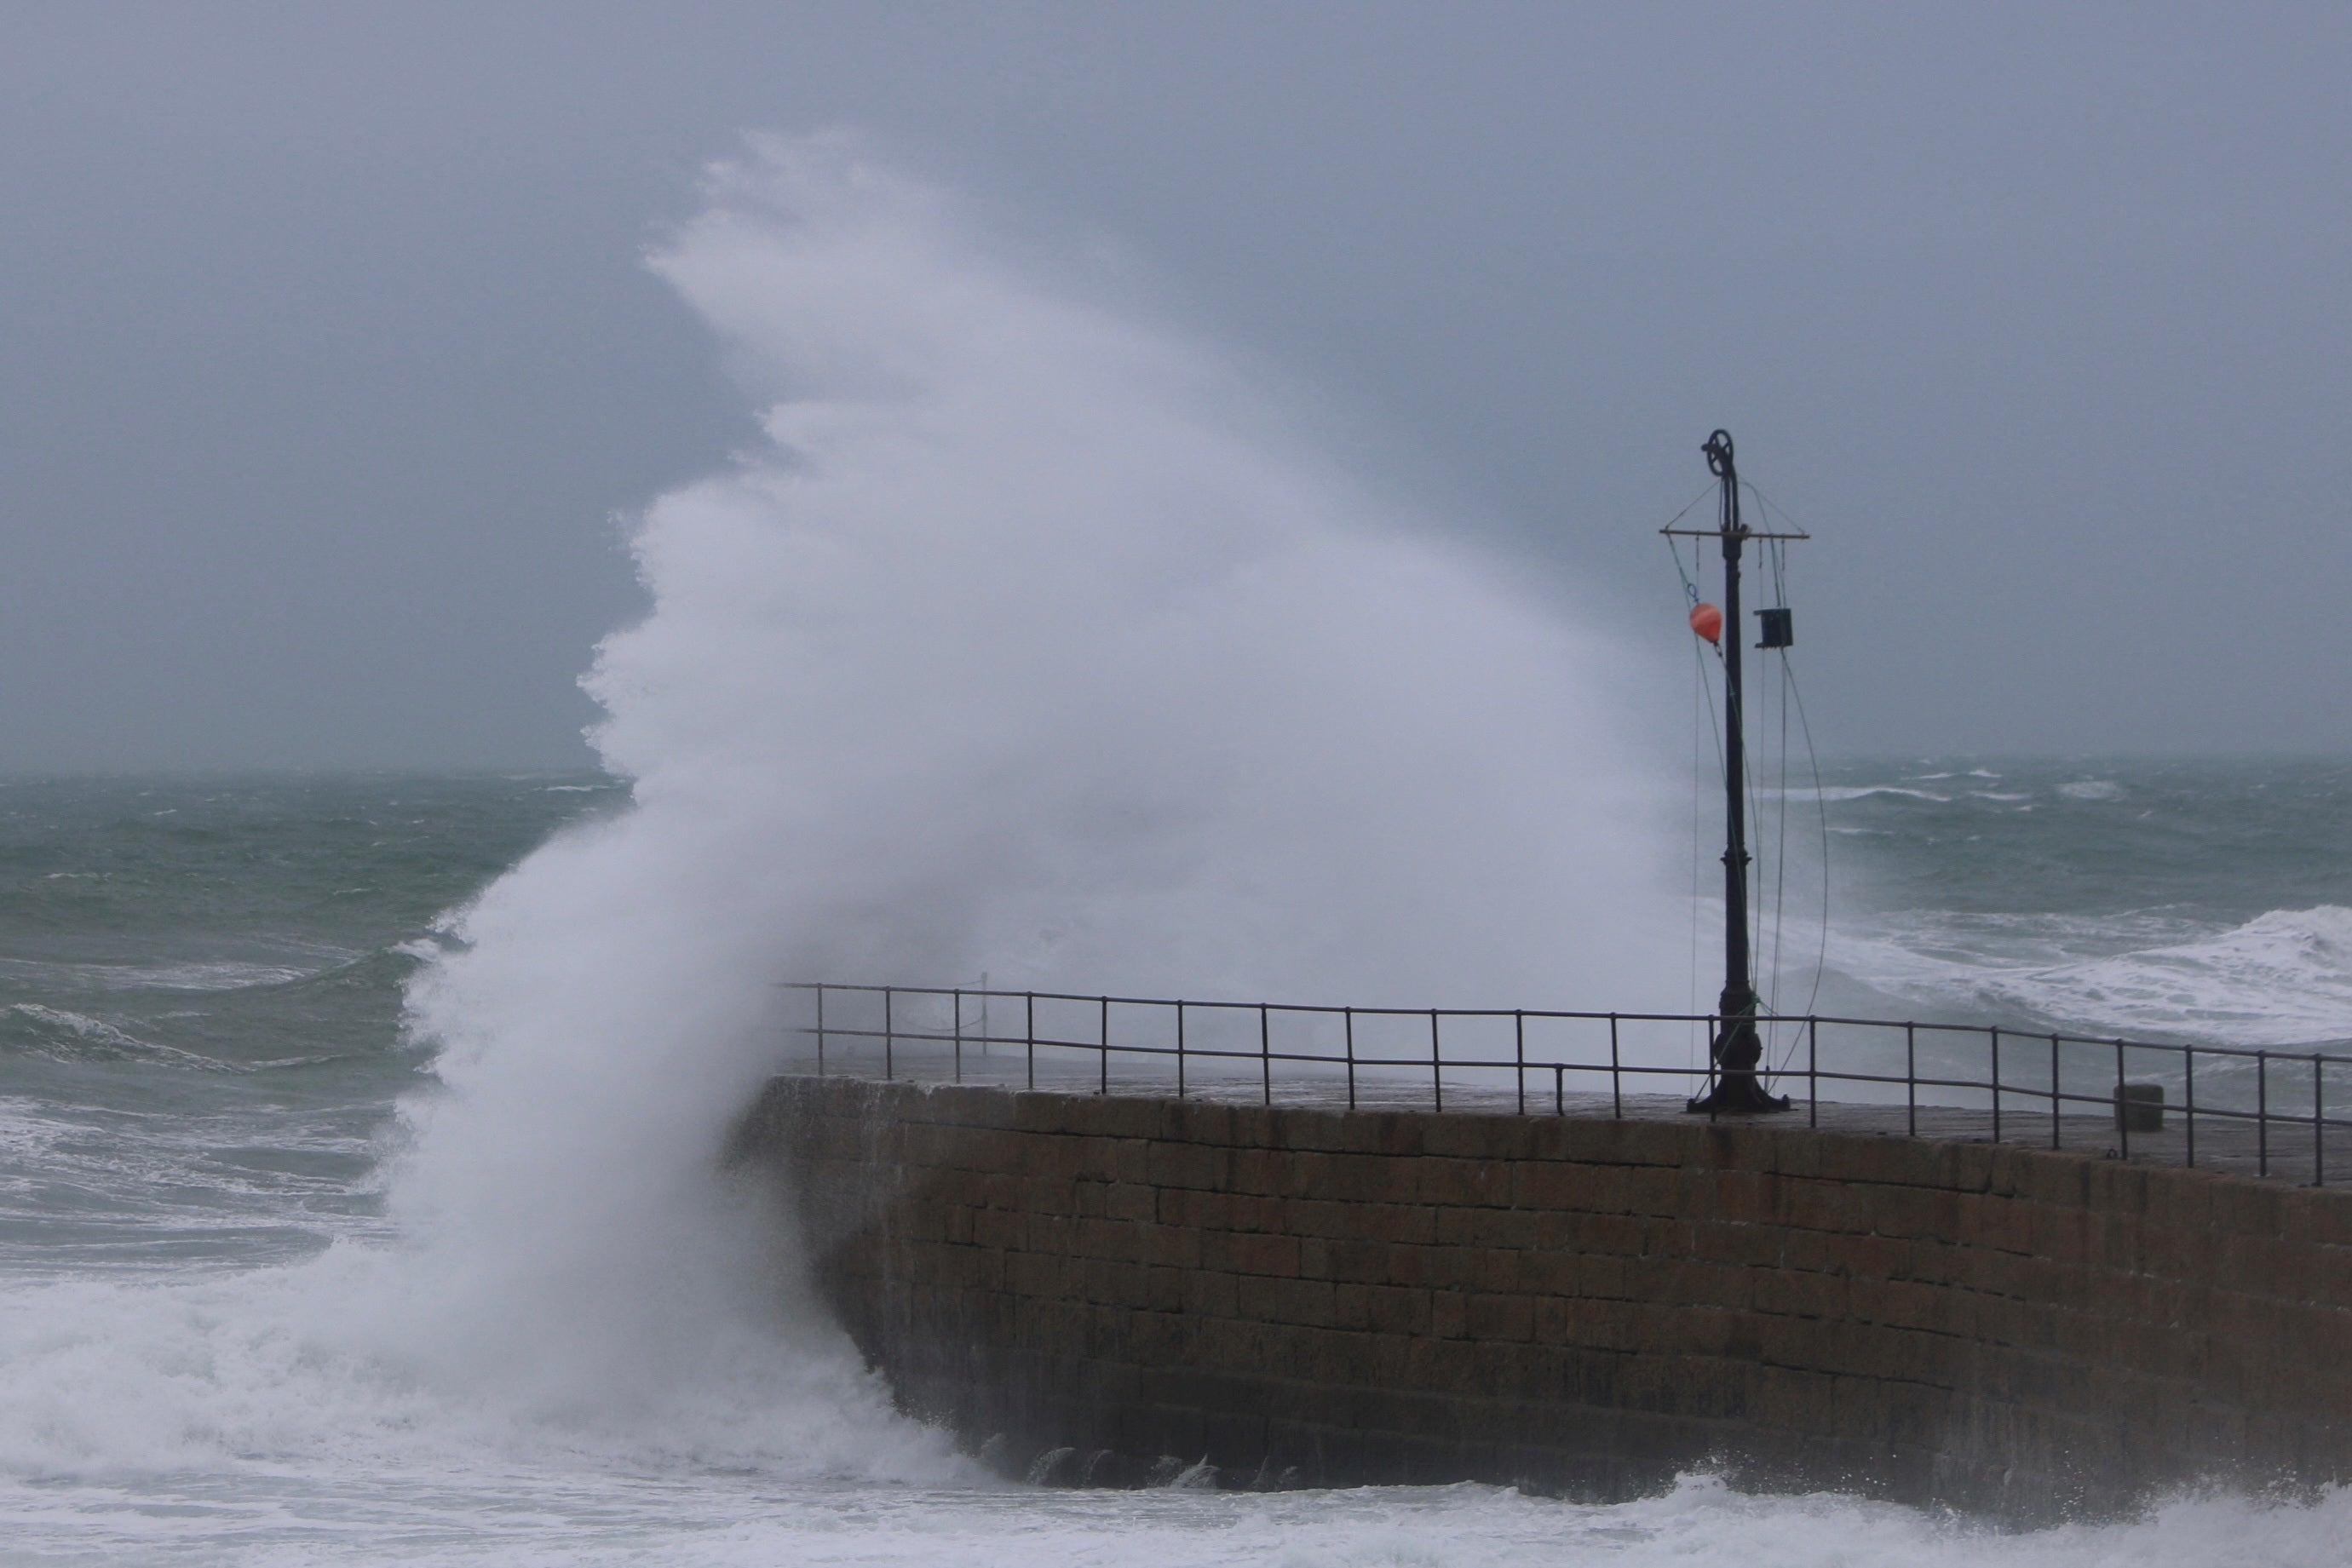 The Met Office warned of a danger to life along many coastal areas as Storm Jocelyn sweeps across the country